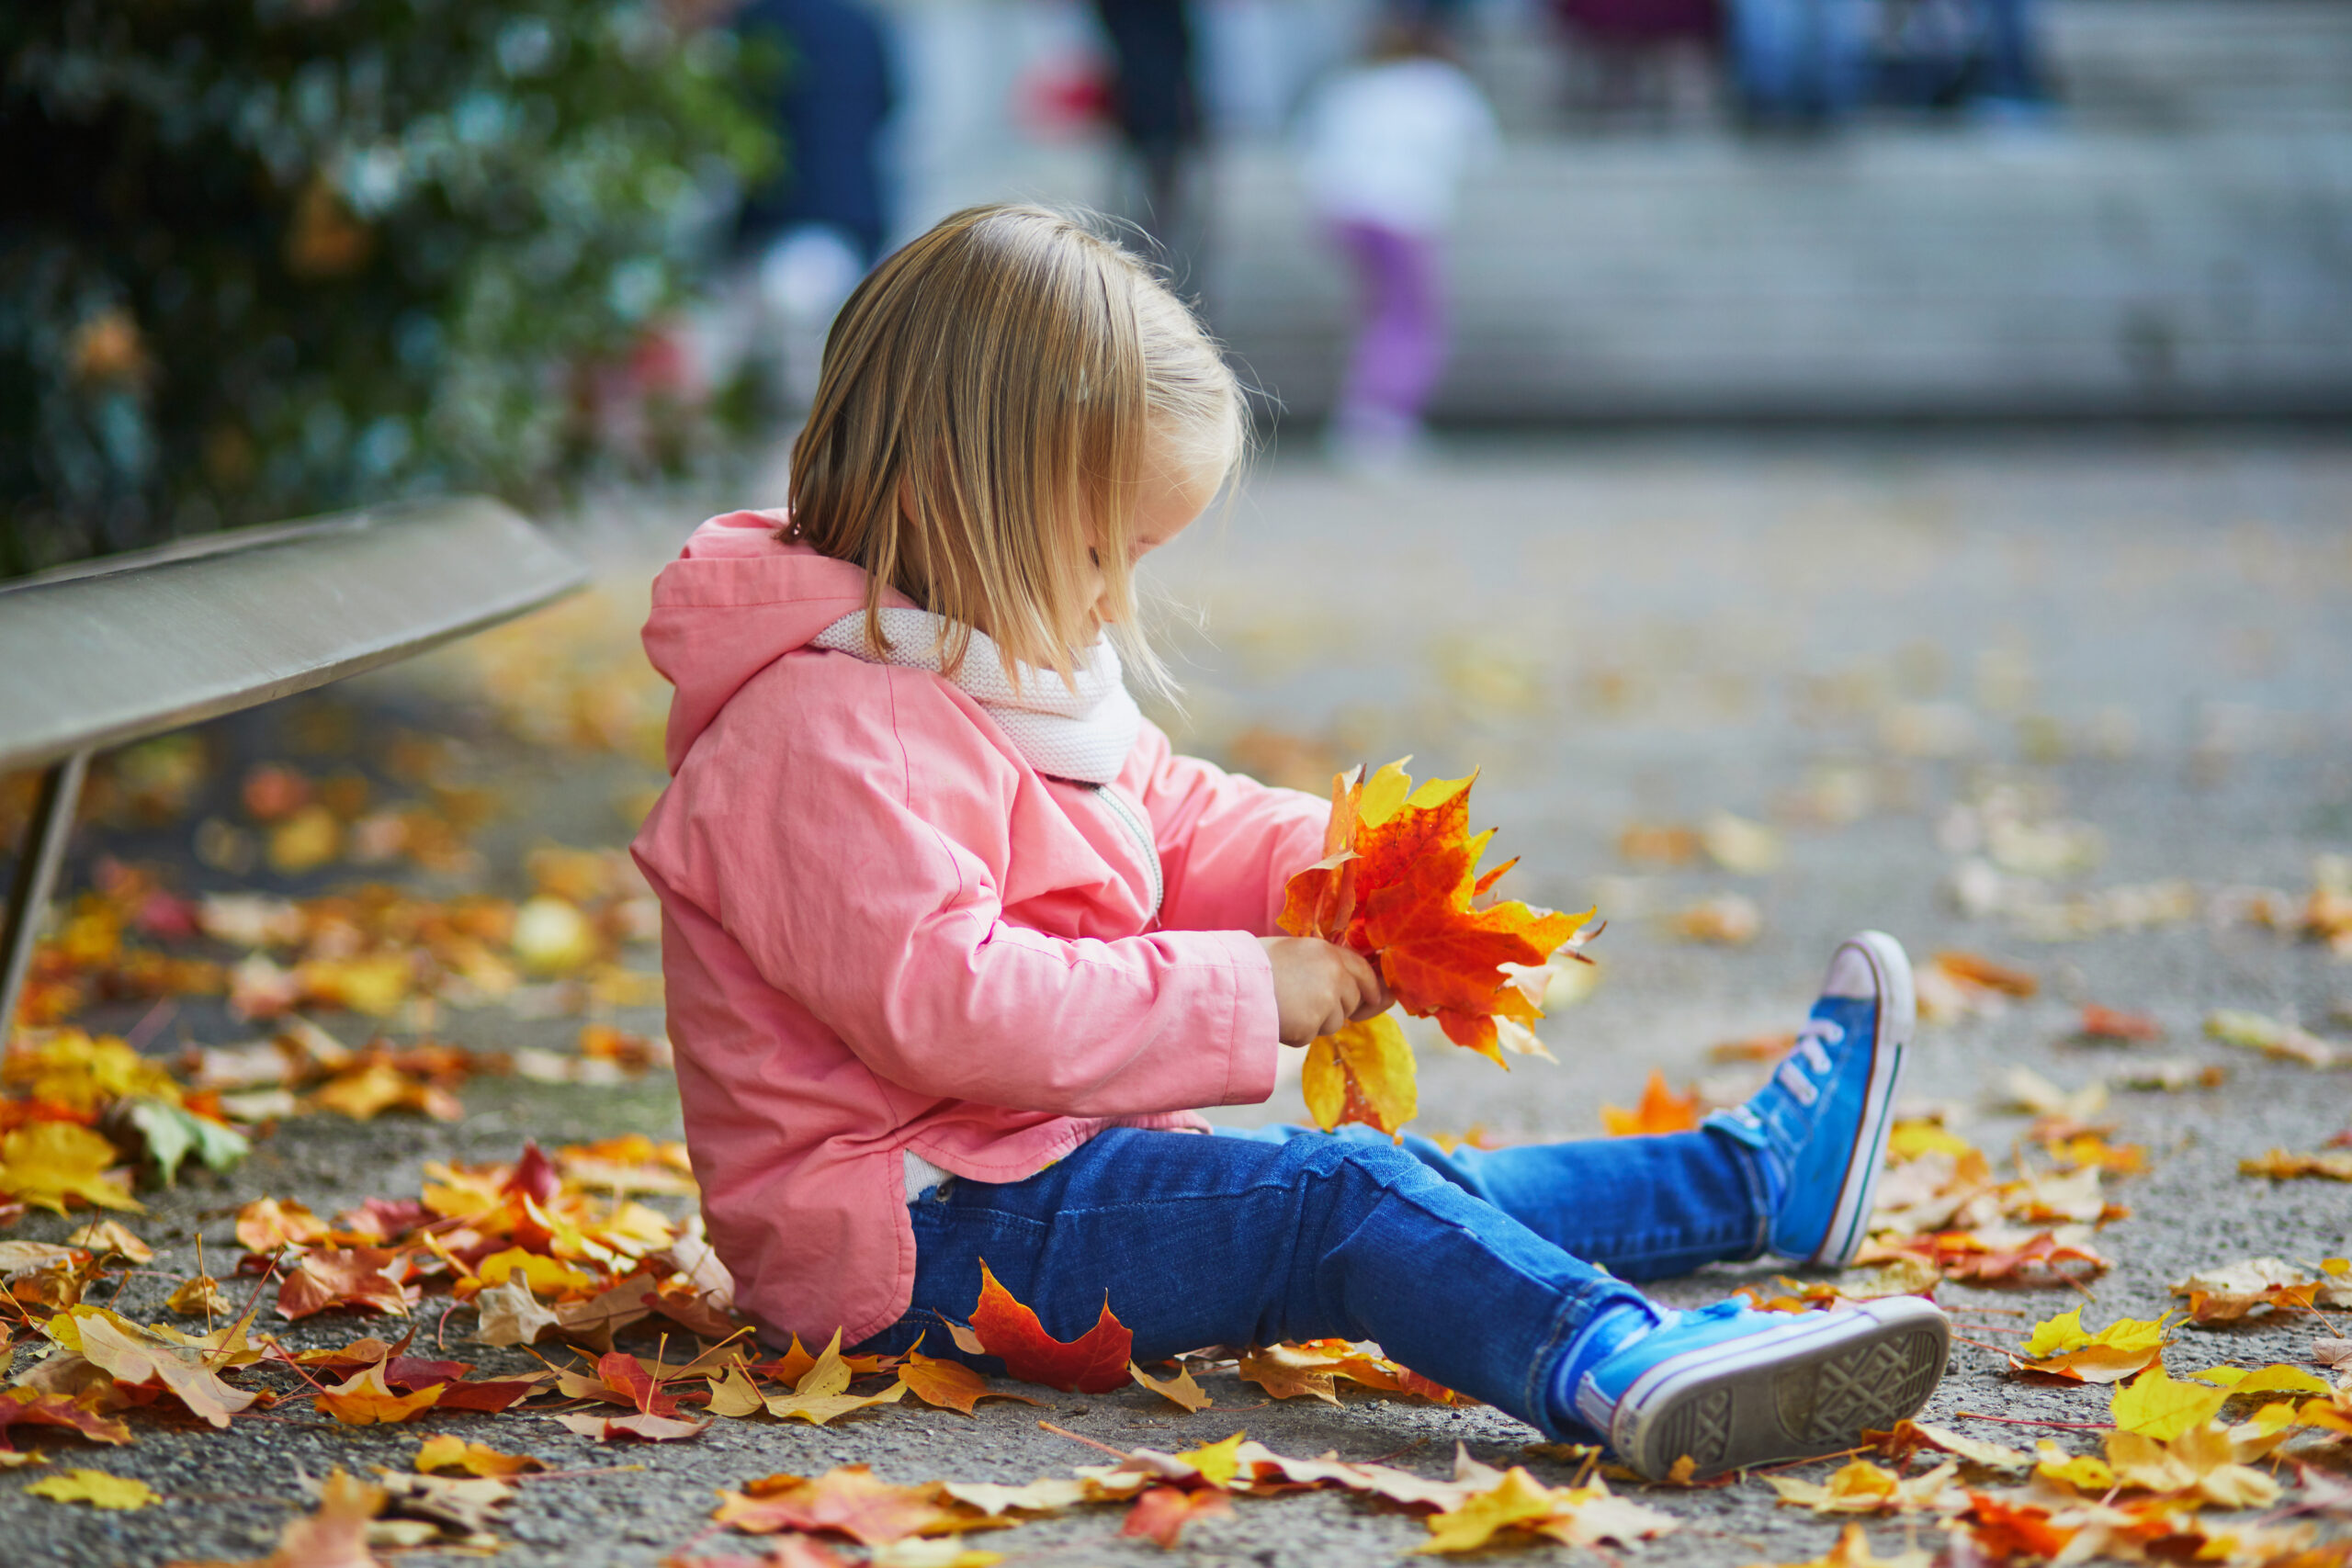 Adorable toddler girl sitting on the ground and gathering fallen leaves in autumn park